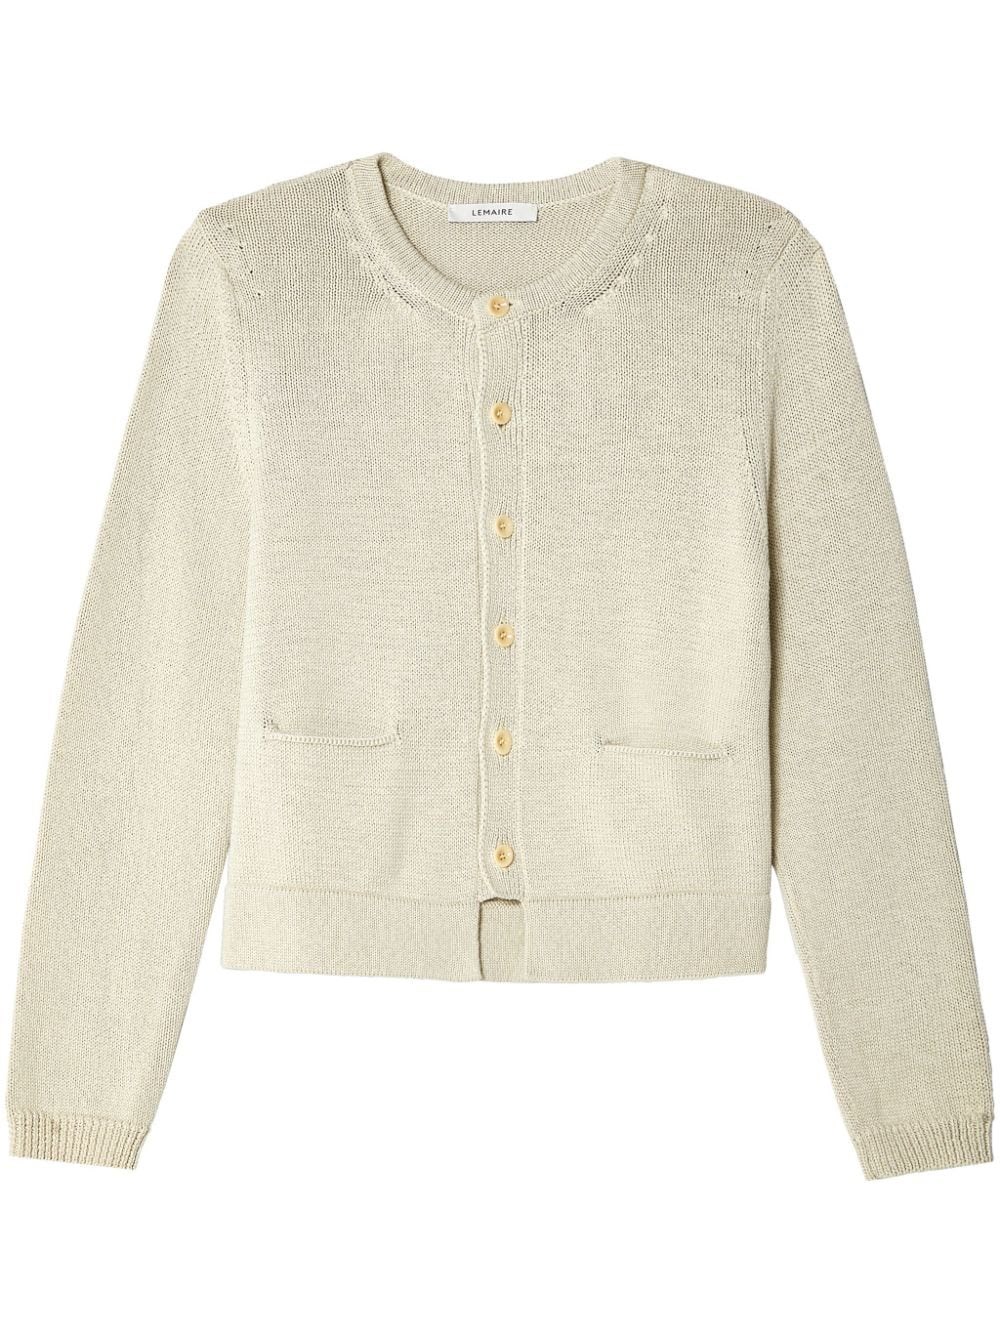 Lemaire Cropped Cardigan In Gray